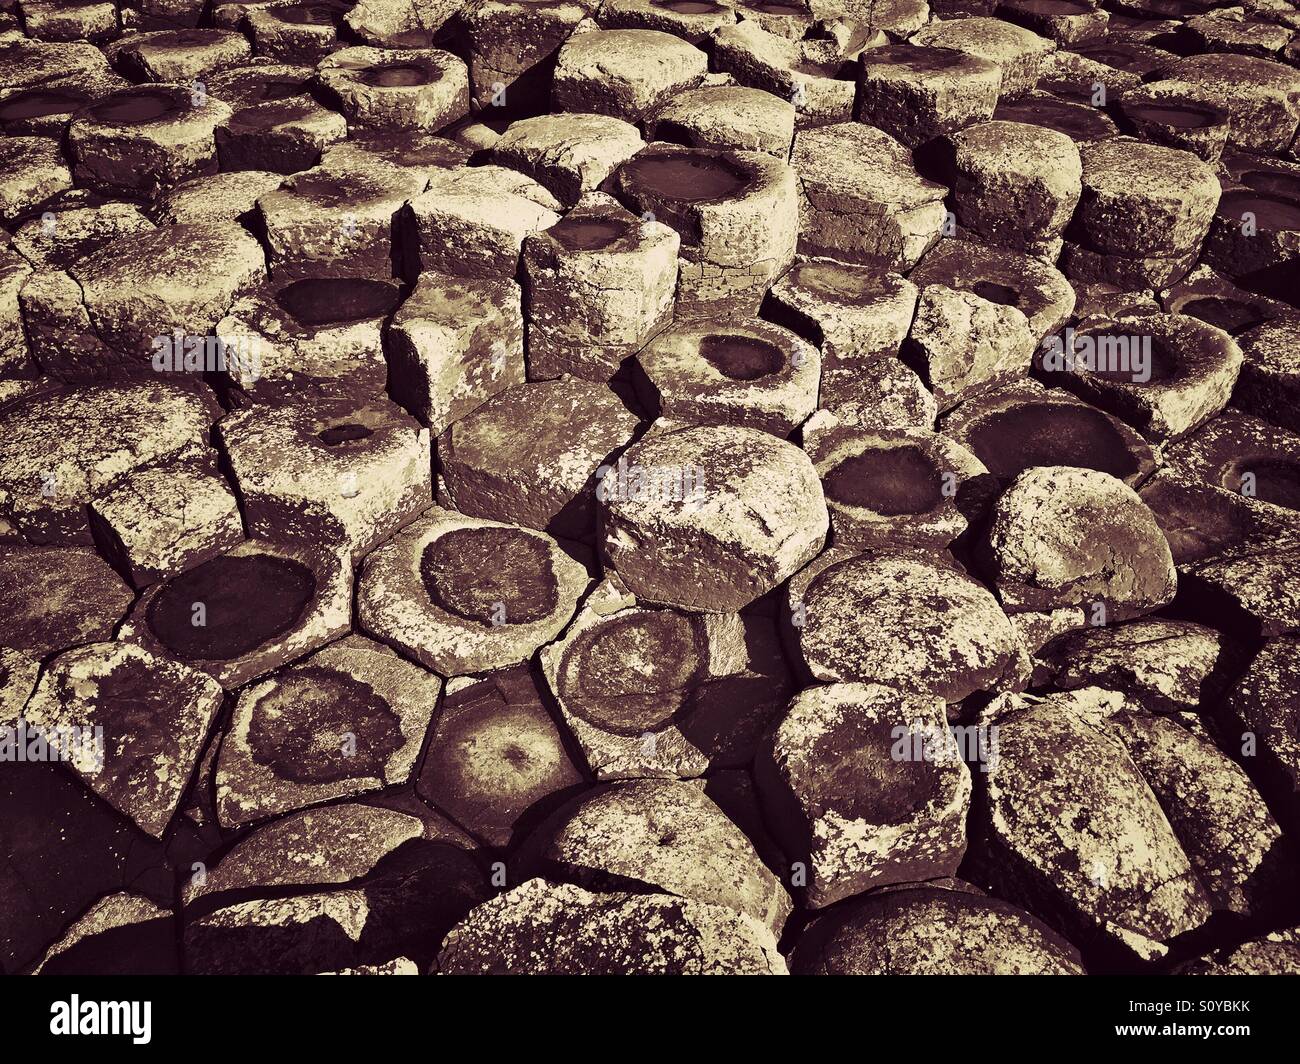 A Grunge Effect View of Interlocking Basalt Columns at Giant's Causeway, Co. Antrim, Northern Ireland. These columns are a result of Volcanic Activity possibly 60 million years ago. © COLIN HOSKINS. Stock Photo